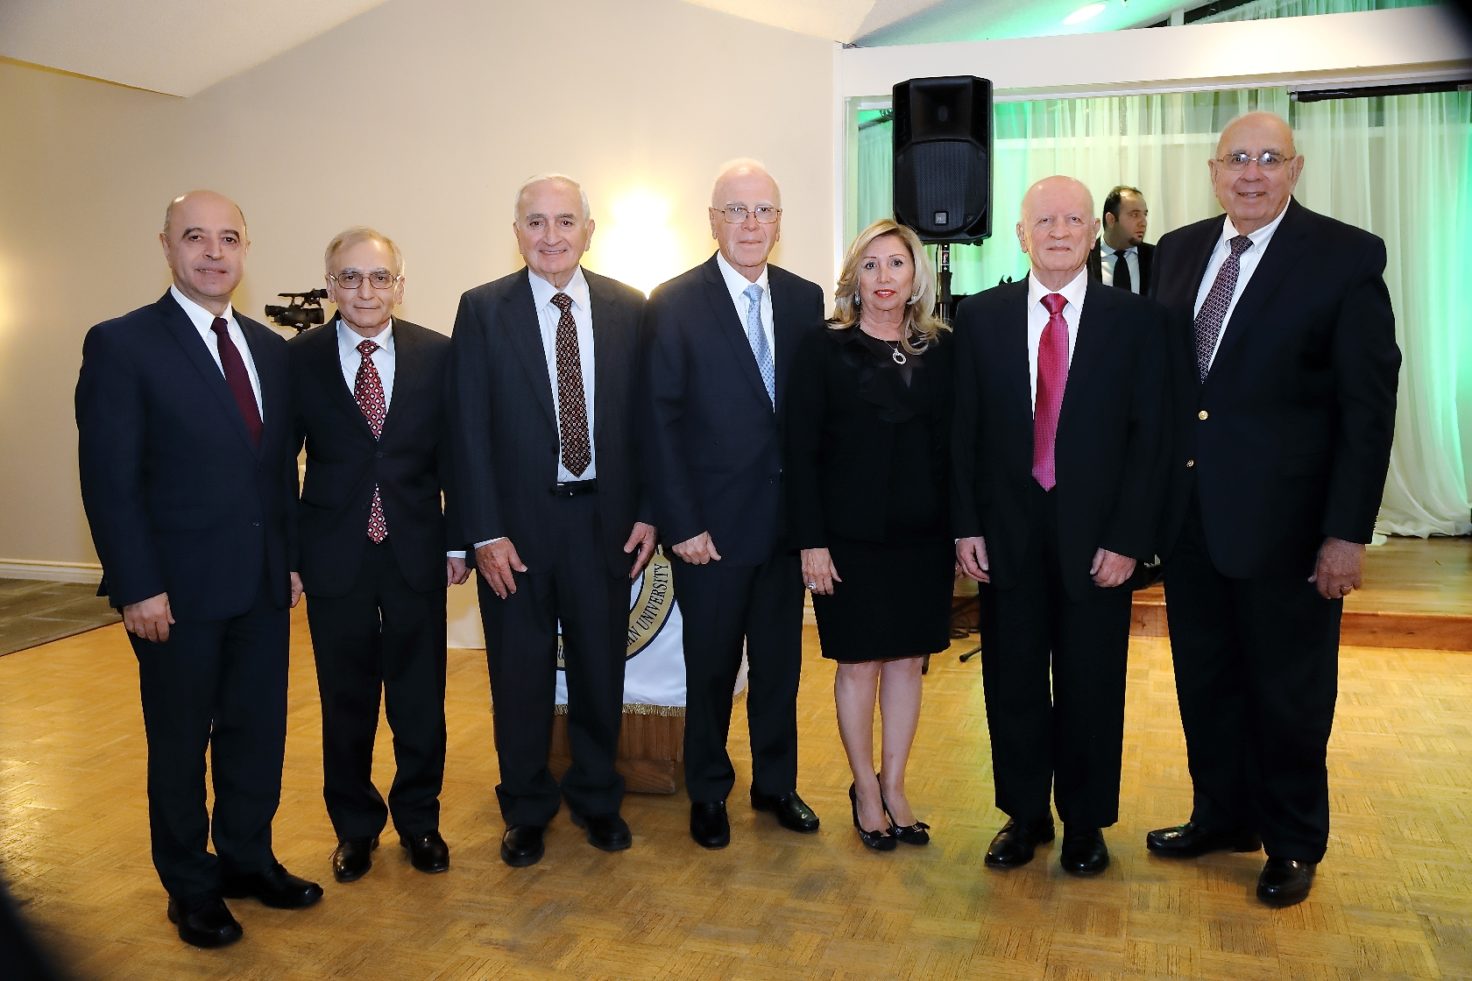 HAIGAZIAN UNIVERSITY BOARD of TRUSTEES and ALUMNI ASSOCIATION RAISE FUNDS FOR SCHOLARSHIPS